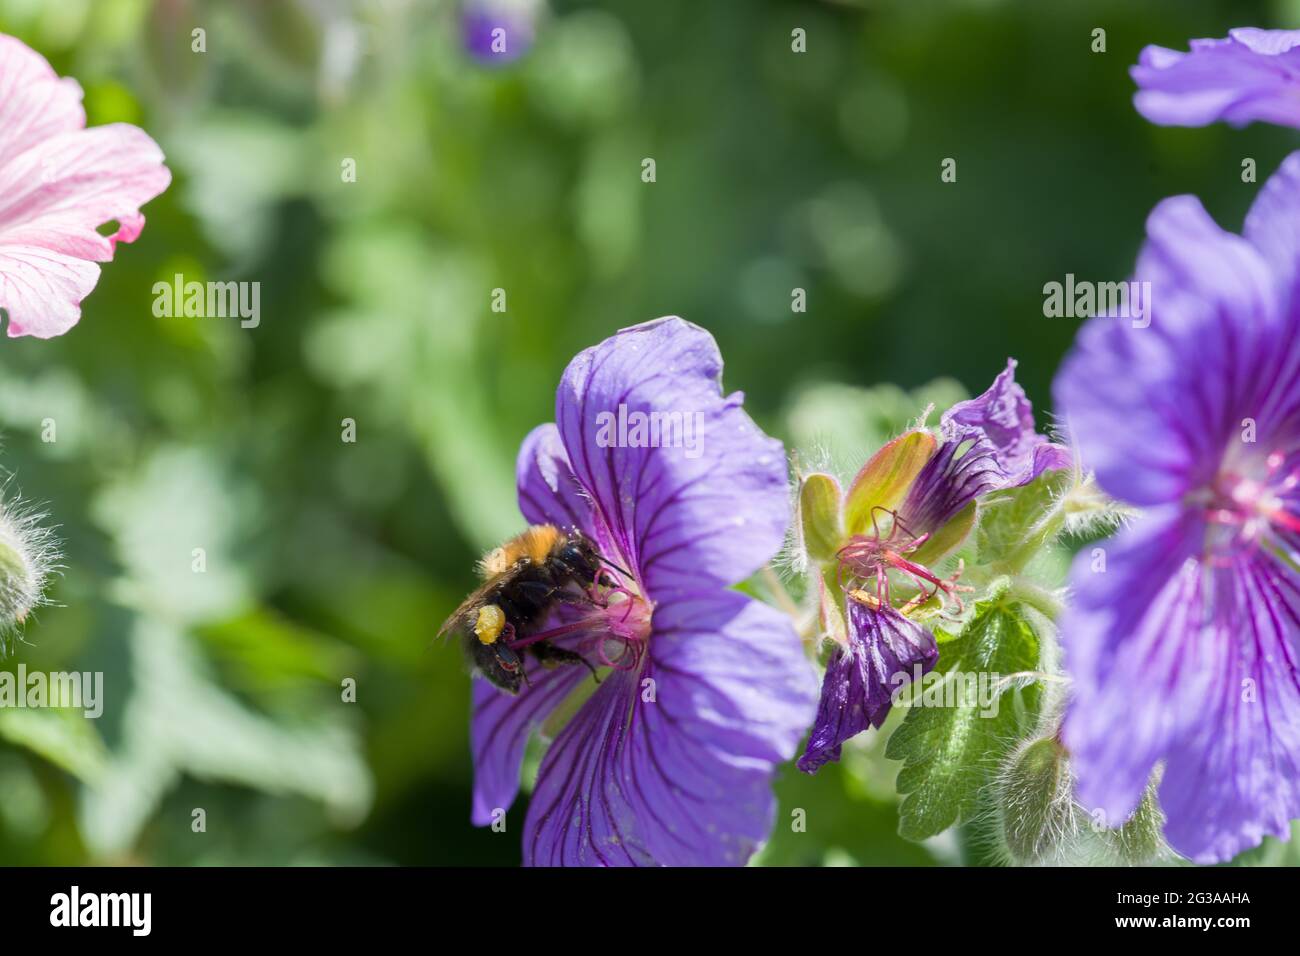 Bumble Bee seeking out nectar and pollen on a blue geranium flower Stock Photo